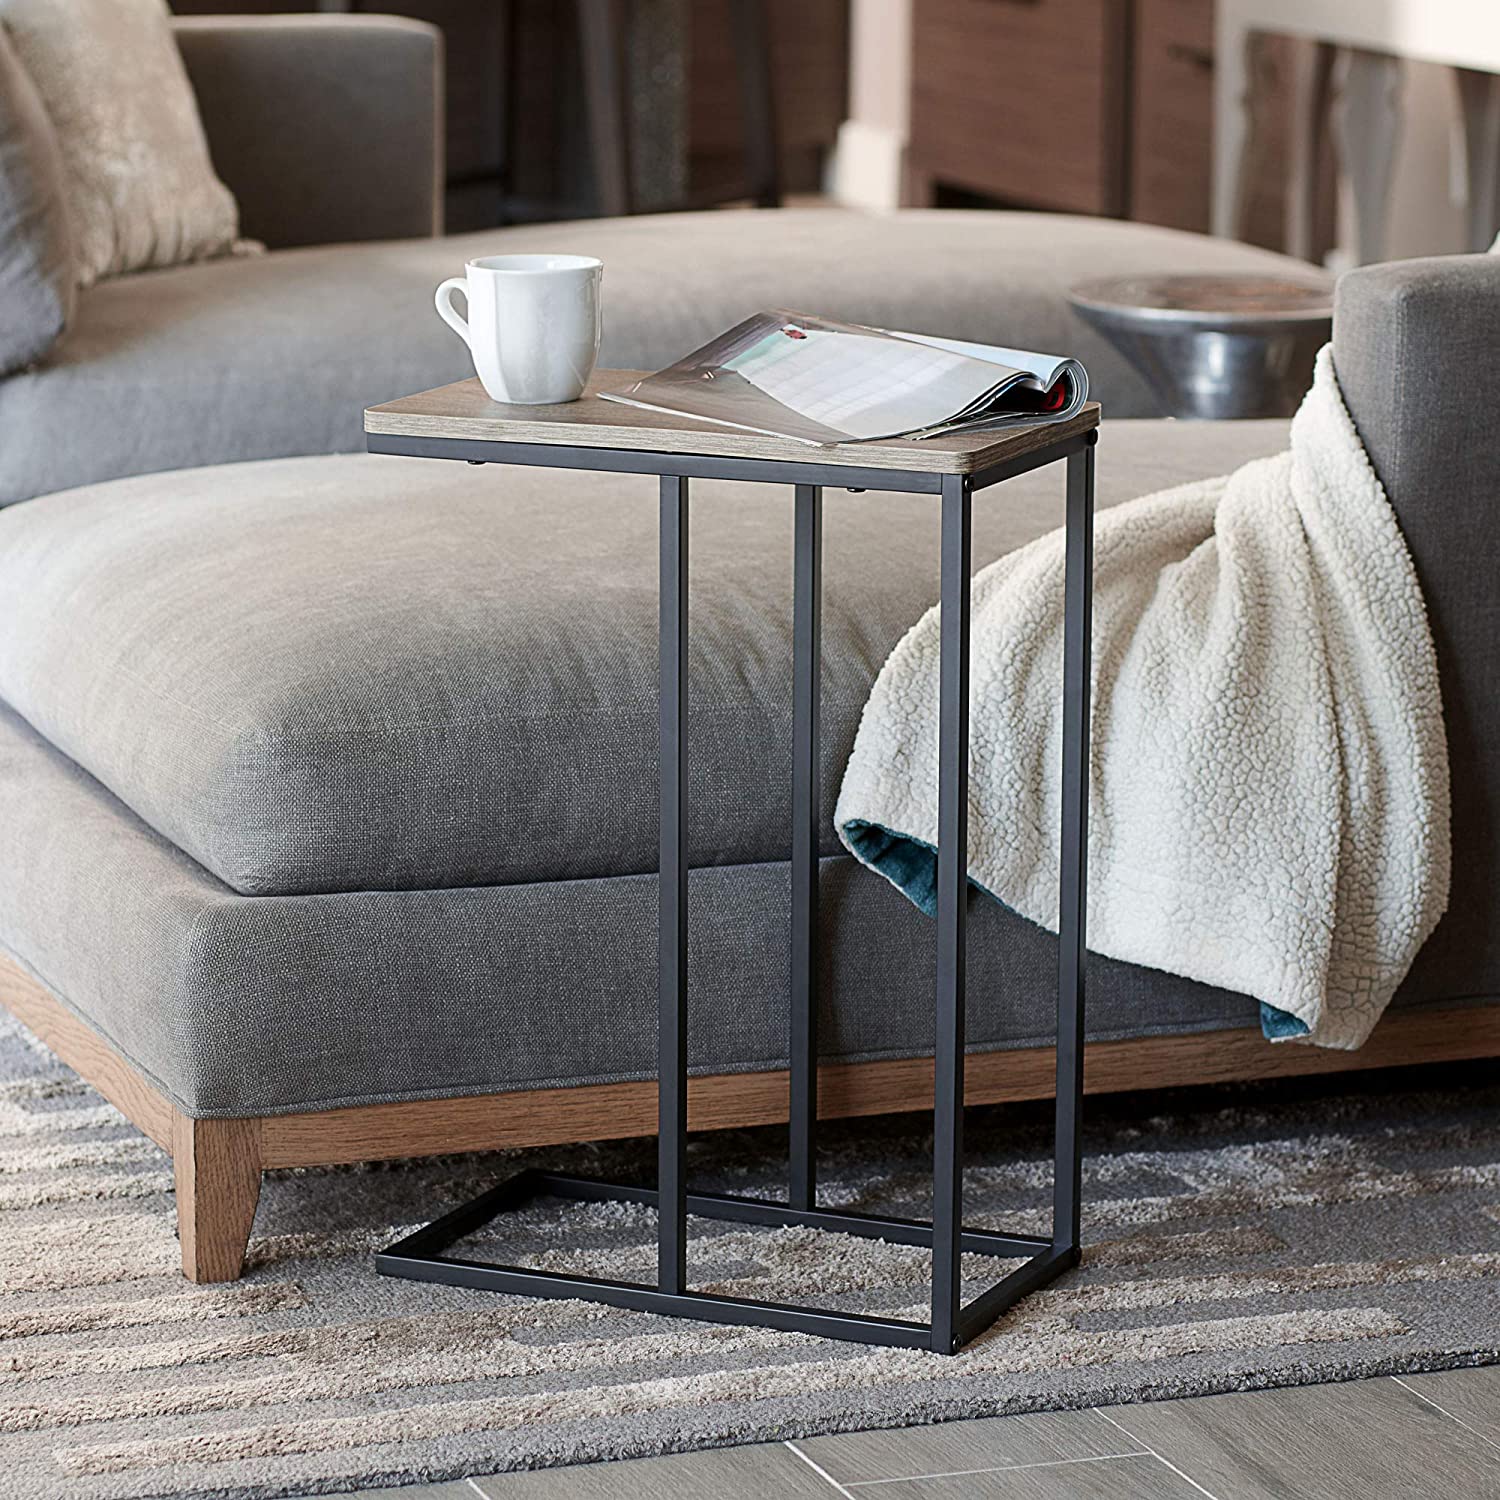 Side Tables : Snack Side Table, C Shaped End Table for Sofa Couch and Bed